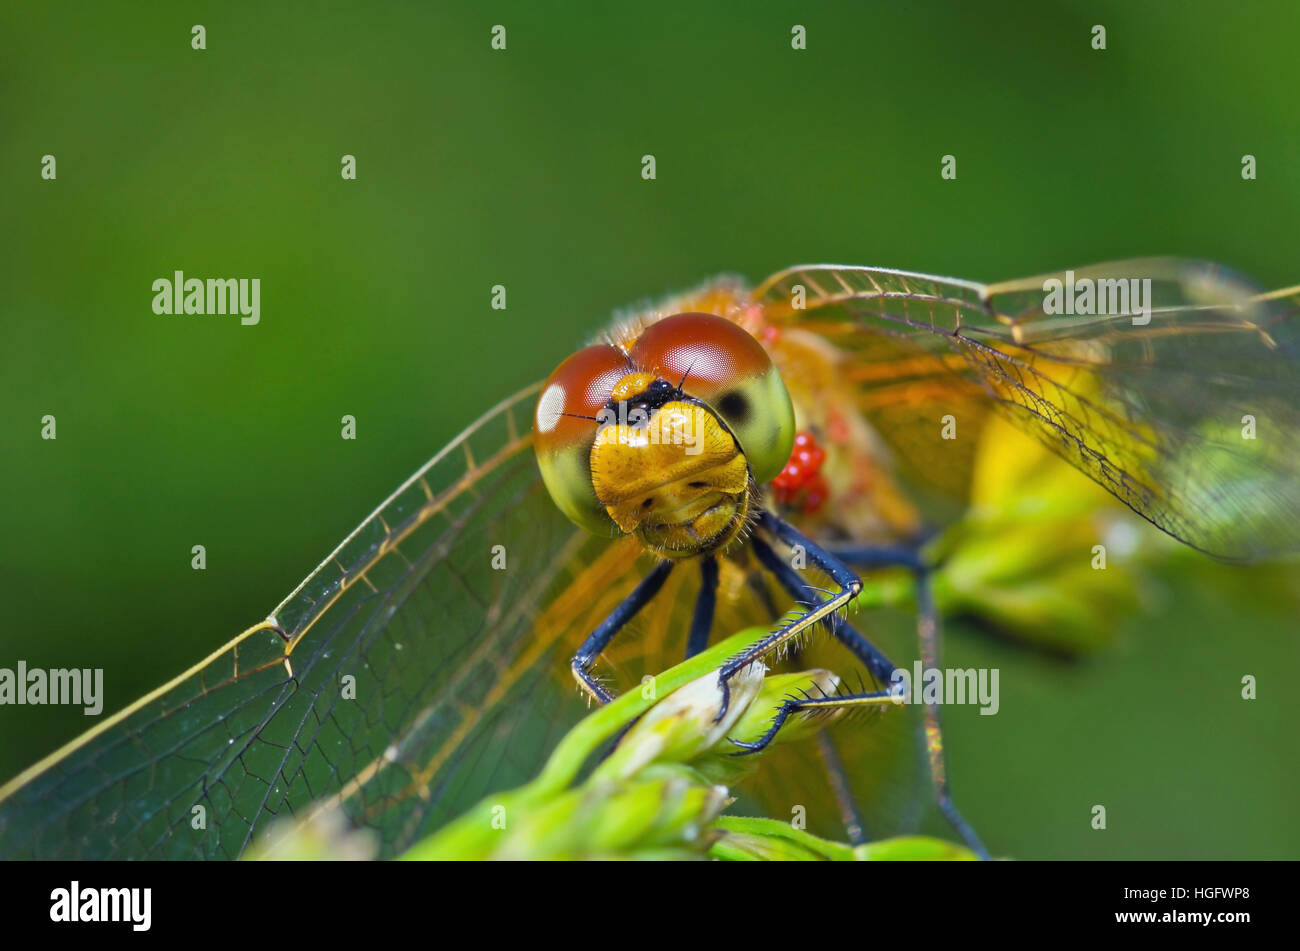 Dragonfly Portrait on Green Background Stock Photo